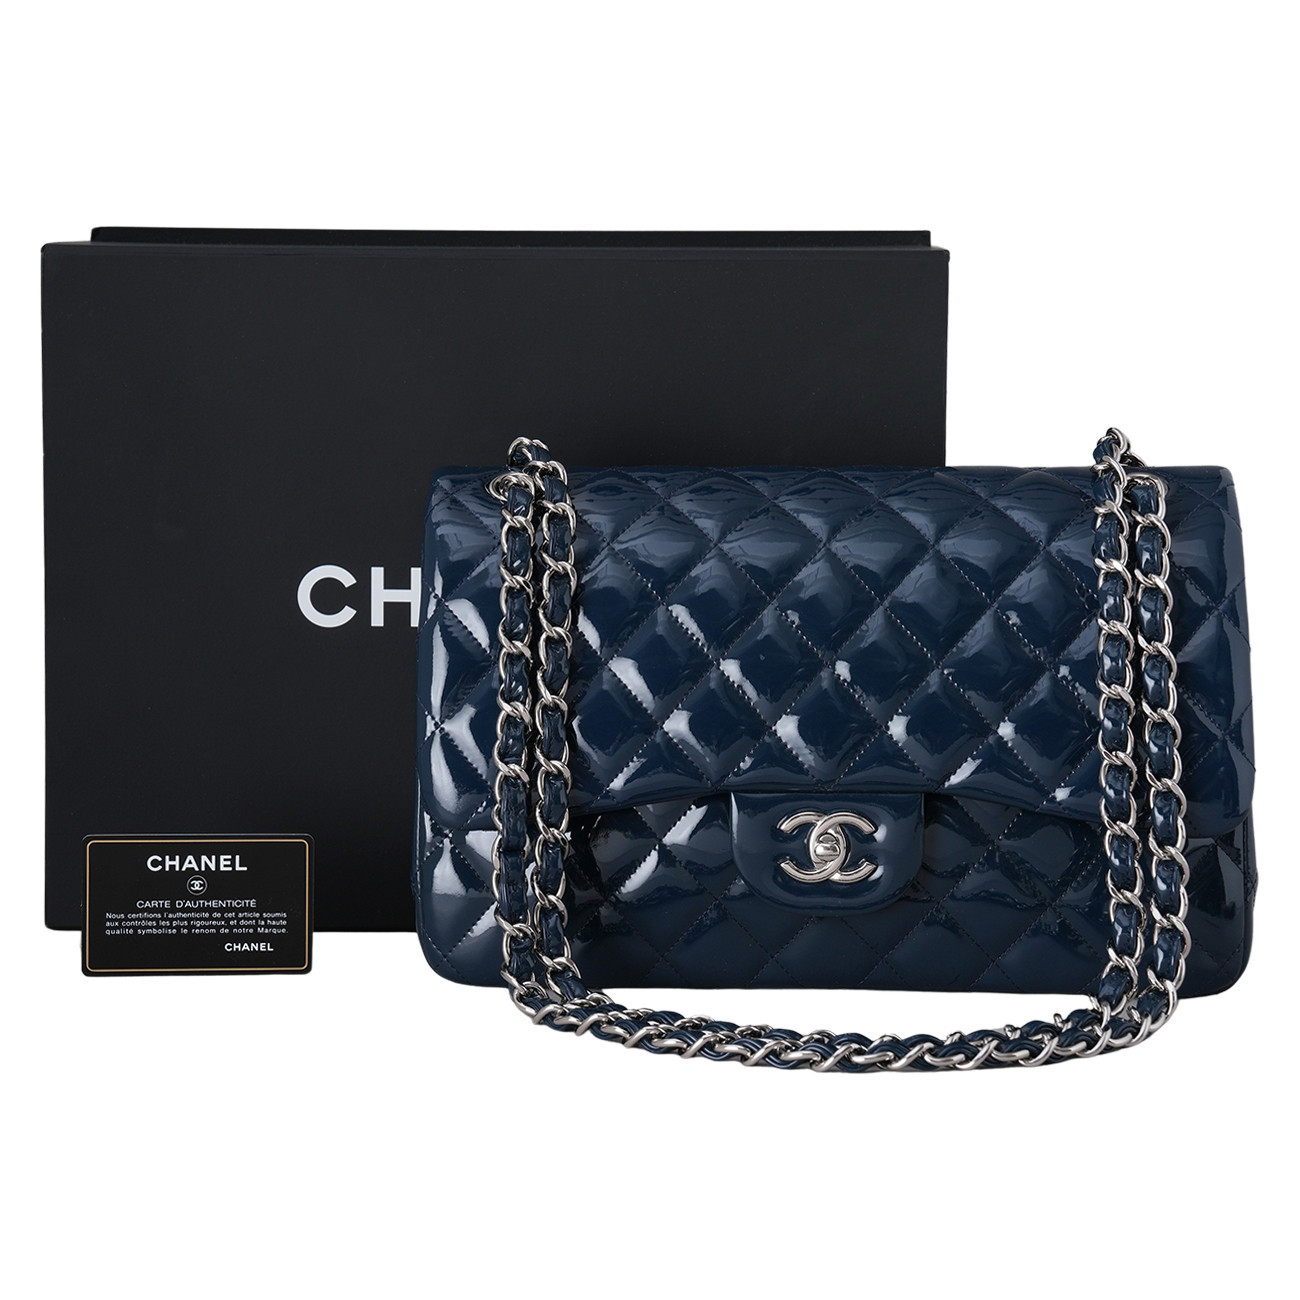 CHANEL CHANEL Coco handle 2way Shoulder Bag A92990 Caviar leather Gray Used  Women GHW A92990